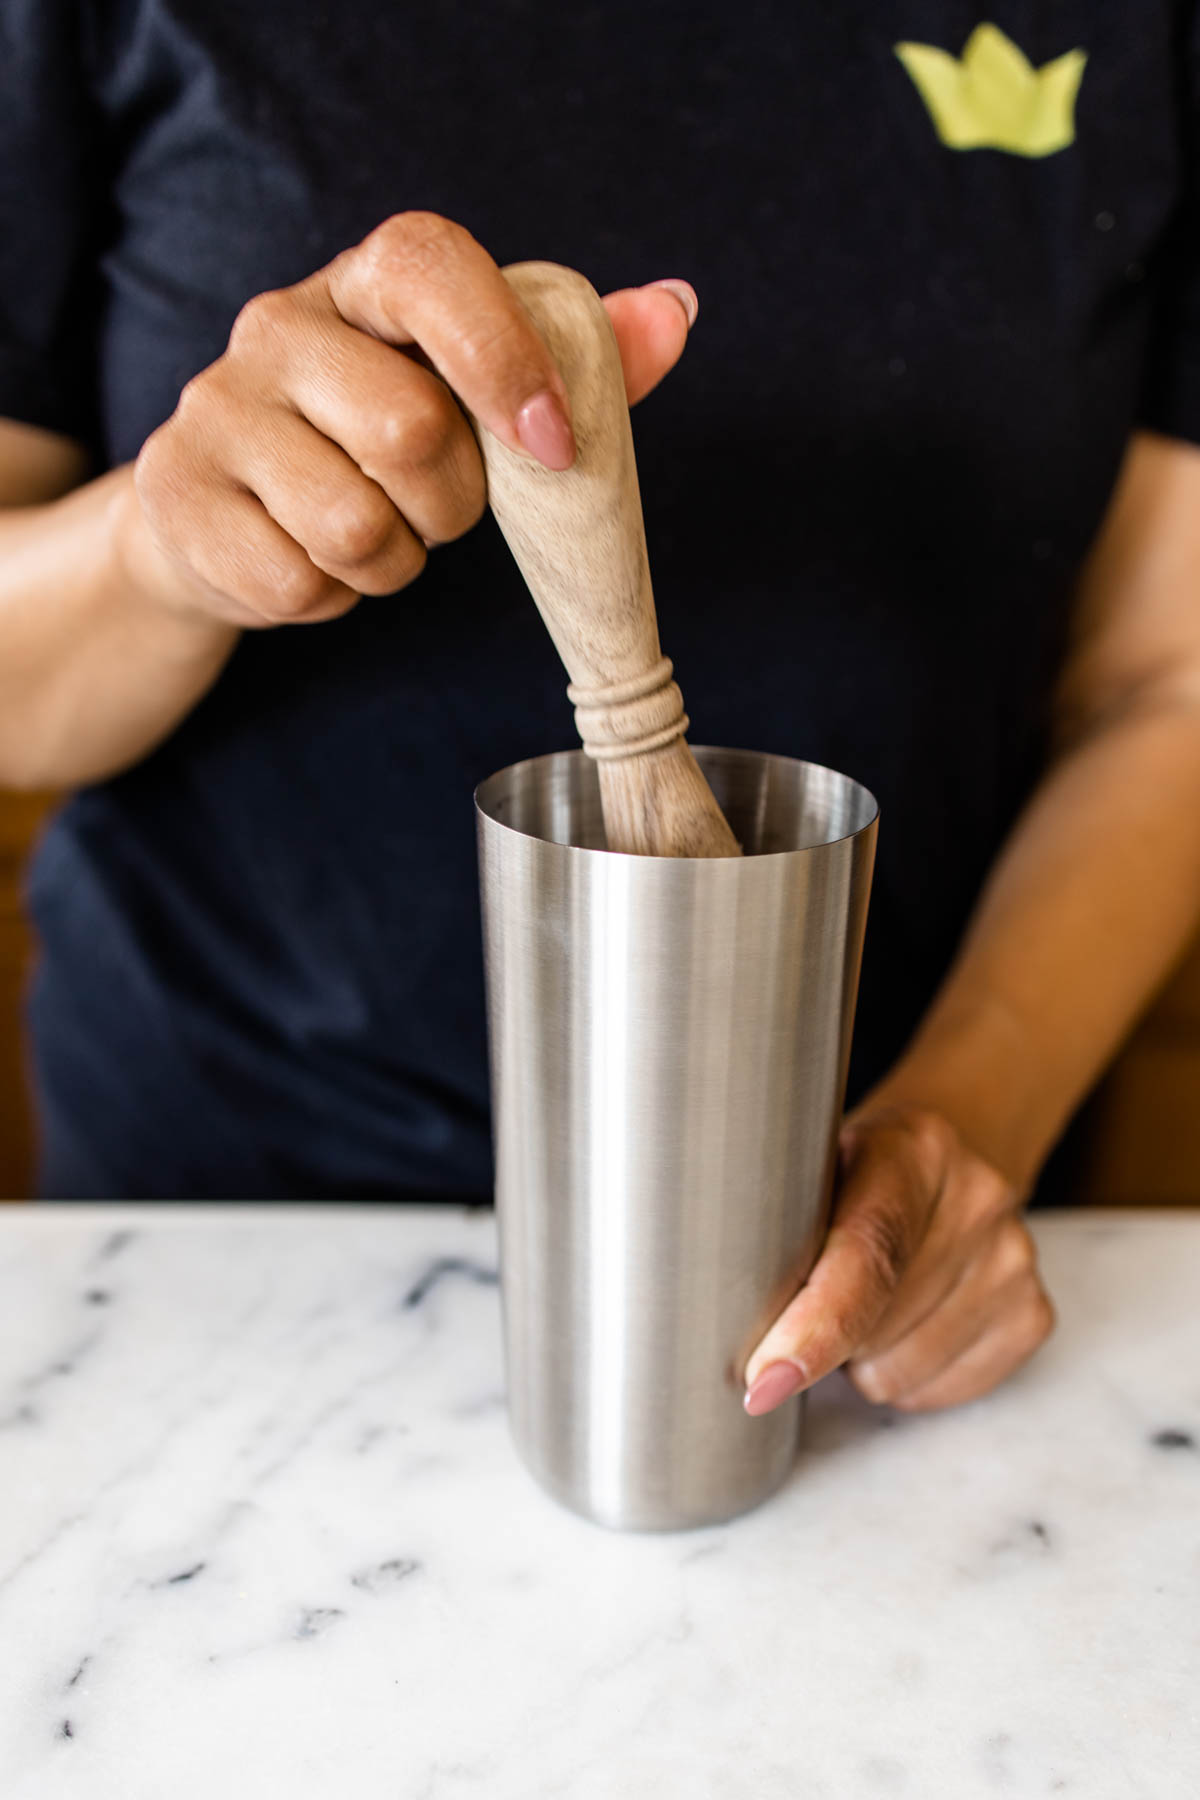 A person muddling ingredients inside a cocktail shaker.